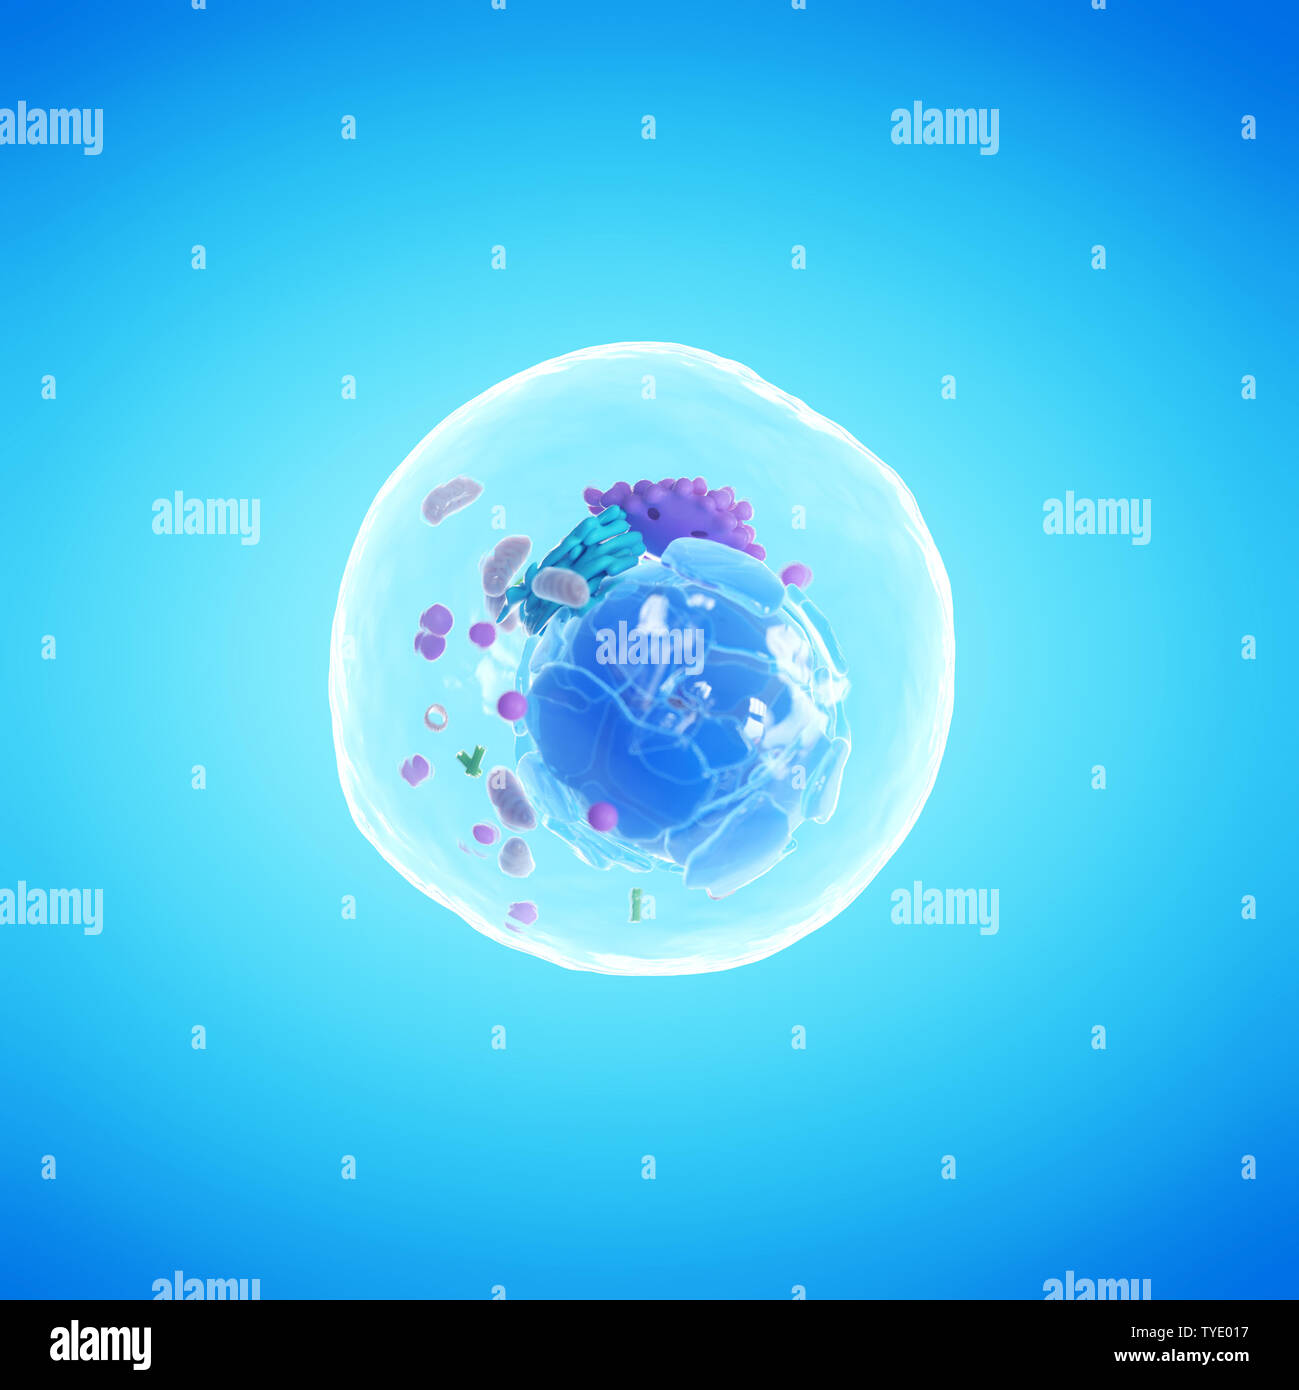 3d illustration of a human cell Stock Photo